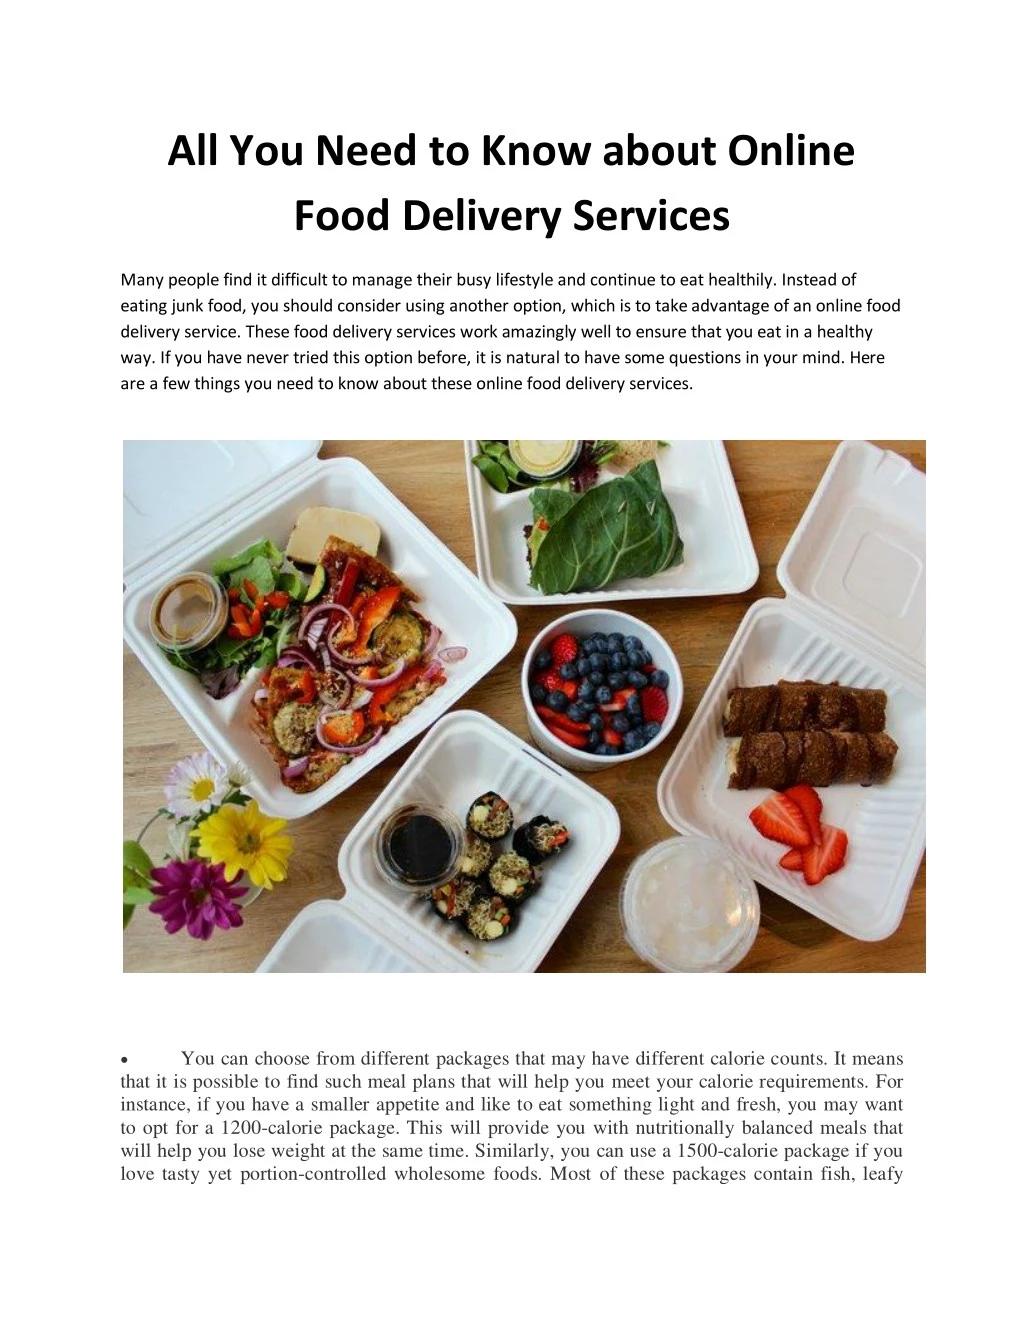 all you need to know about online food delivery